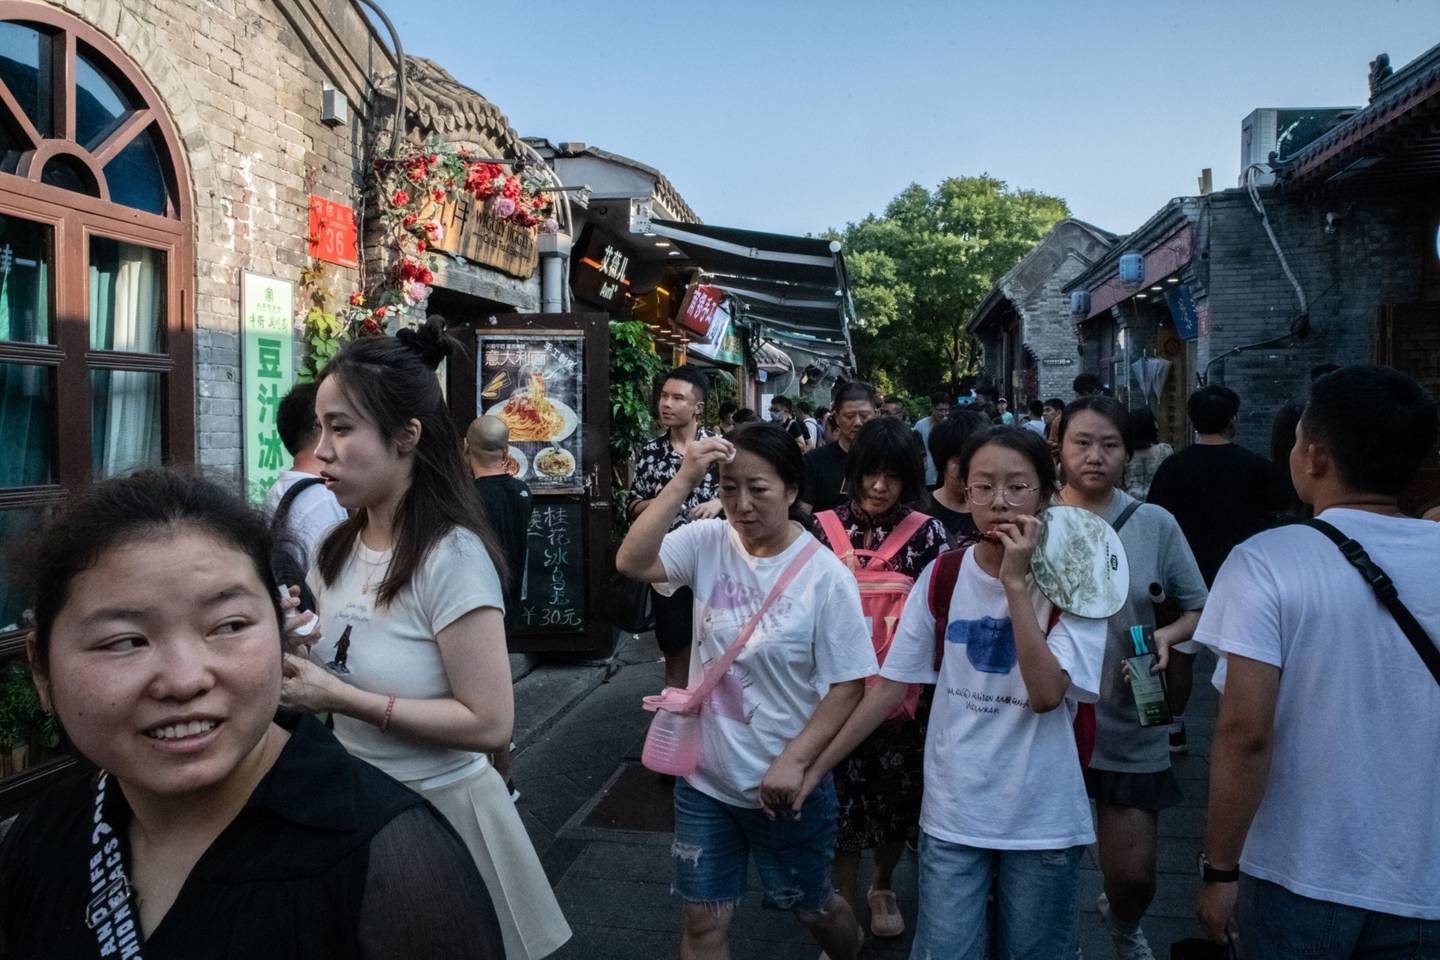 Visitors in Nanluoguxiang, an alleyway popular with tourists, in Beijing. Source: Bloombergdfd